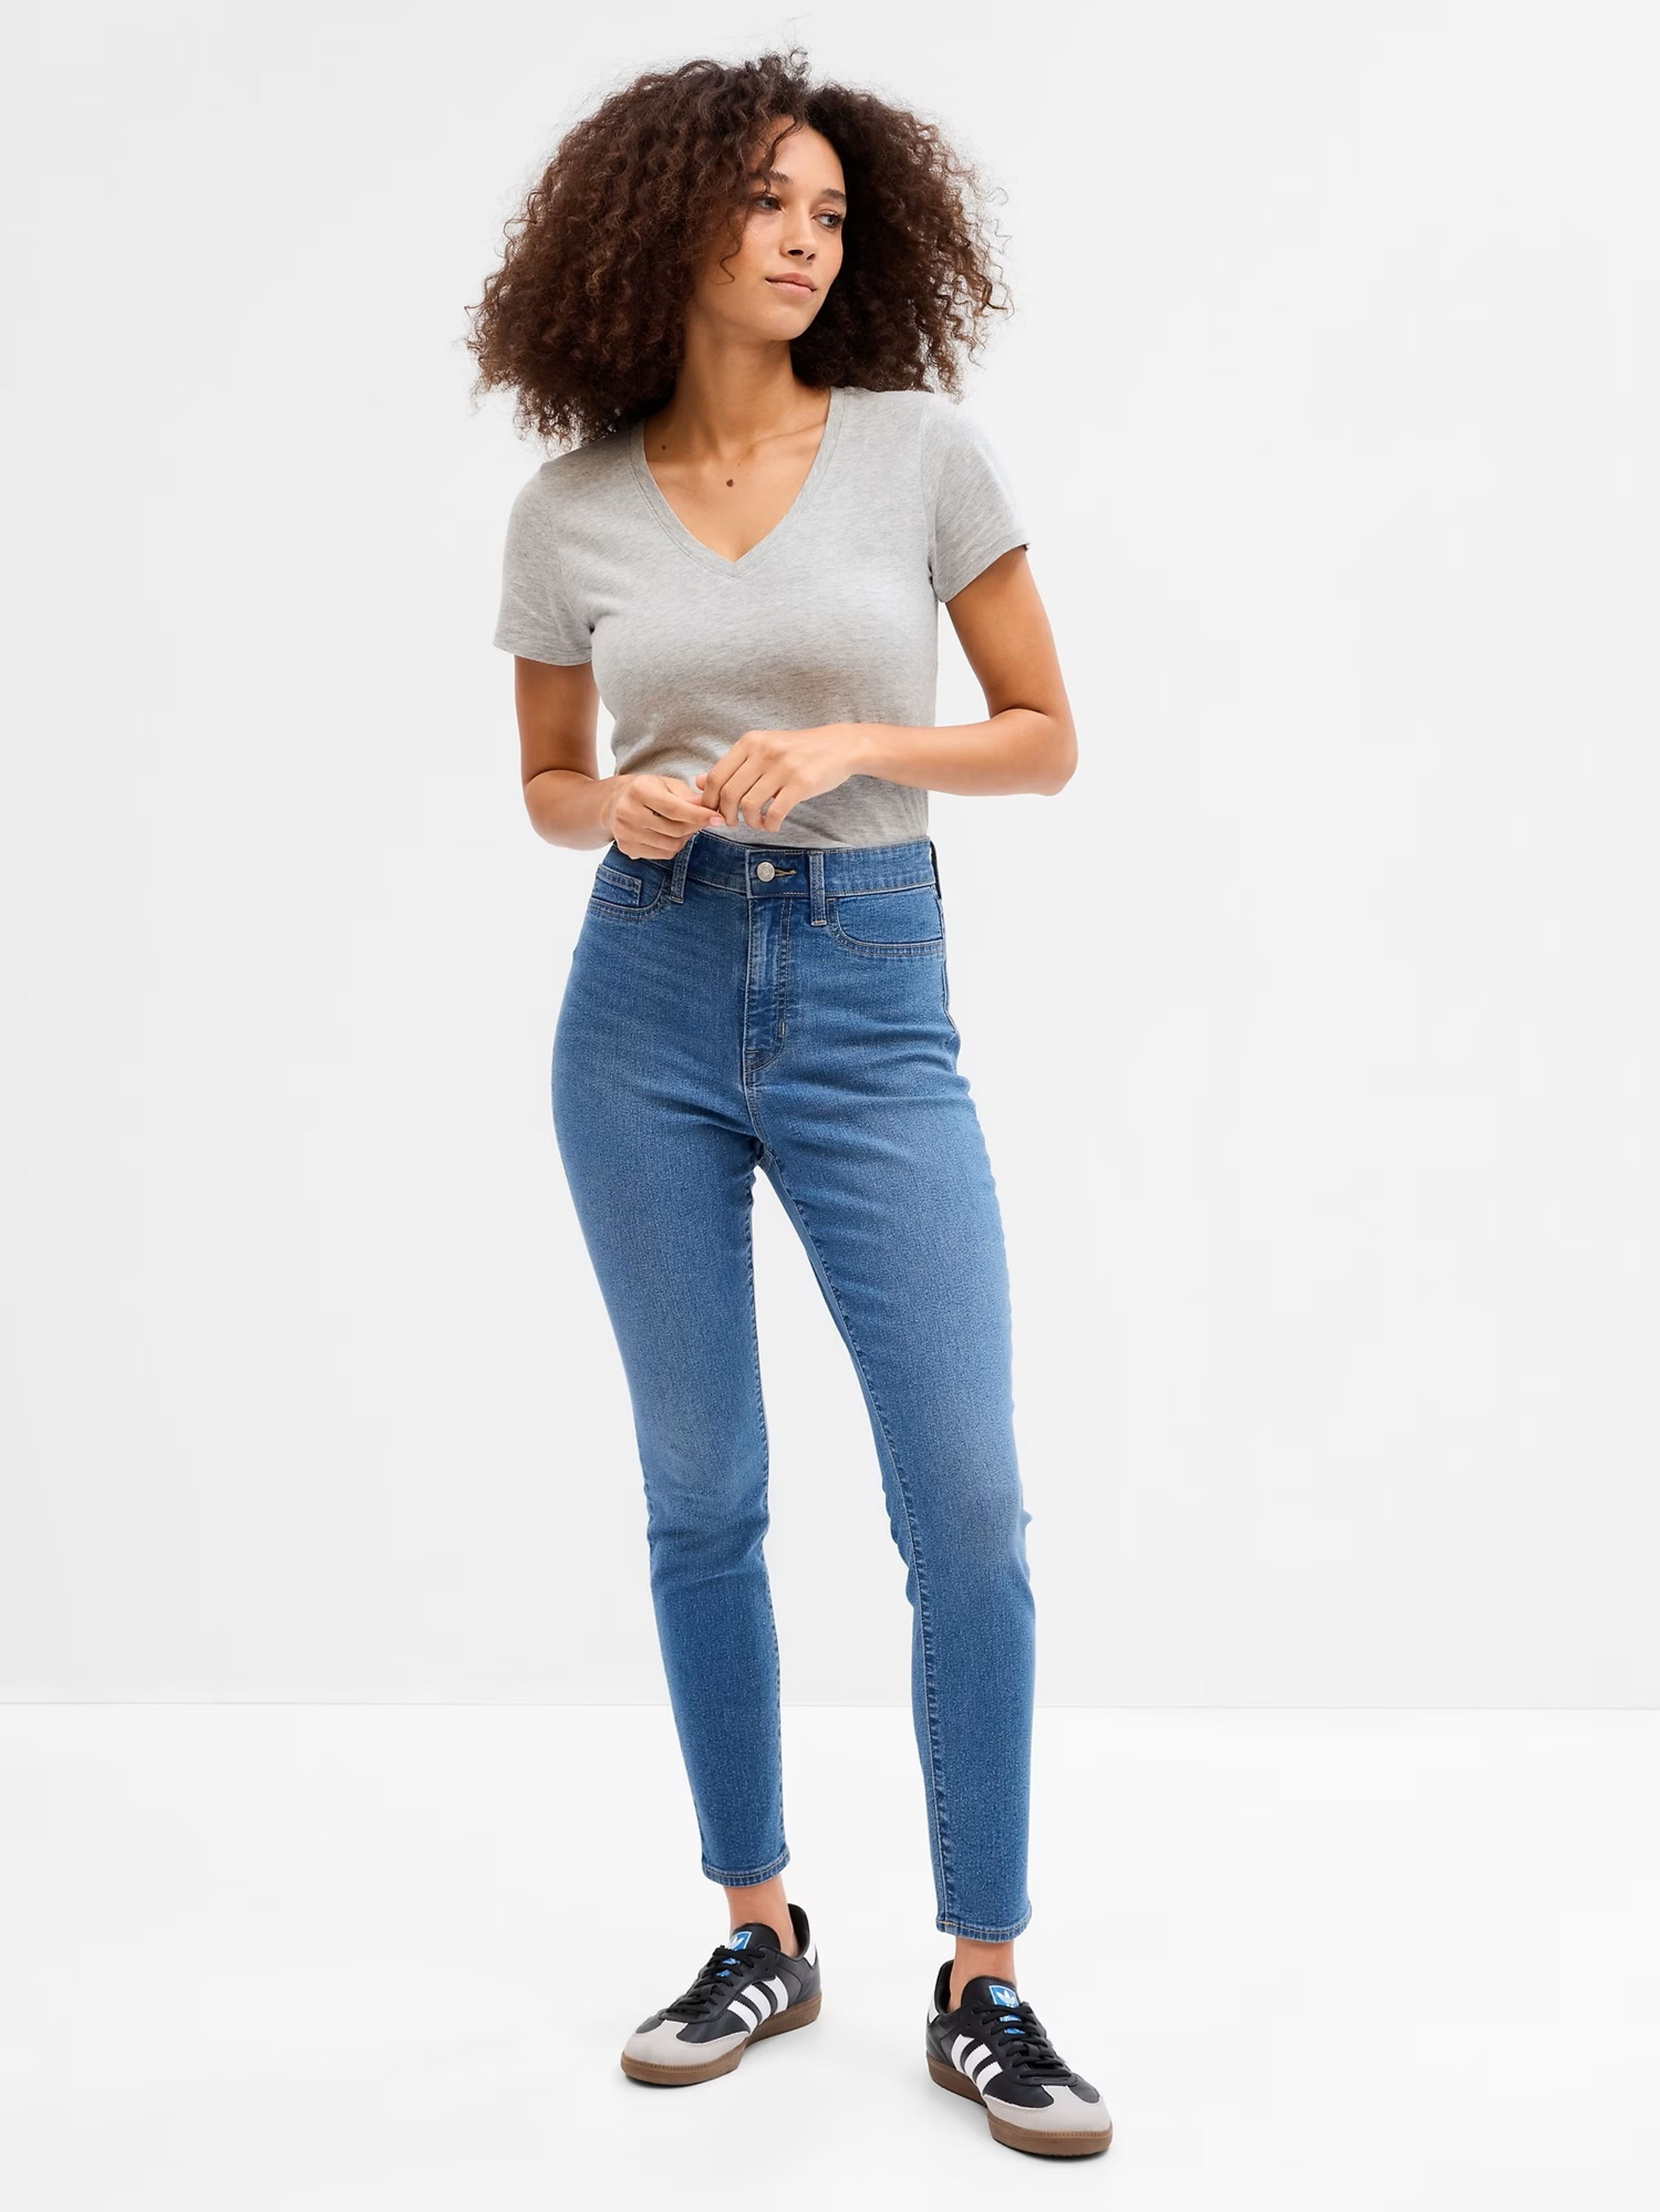 Jeans 90's jeggings high rise